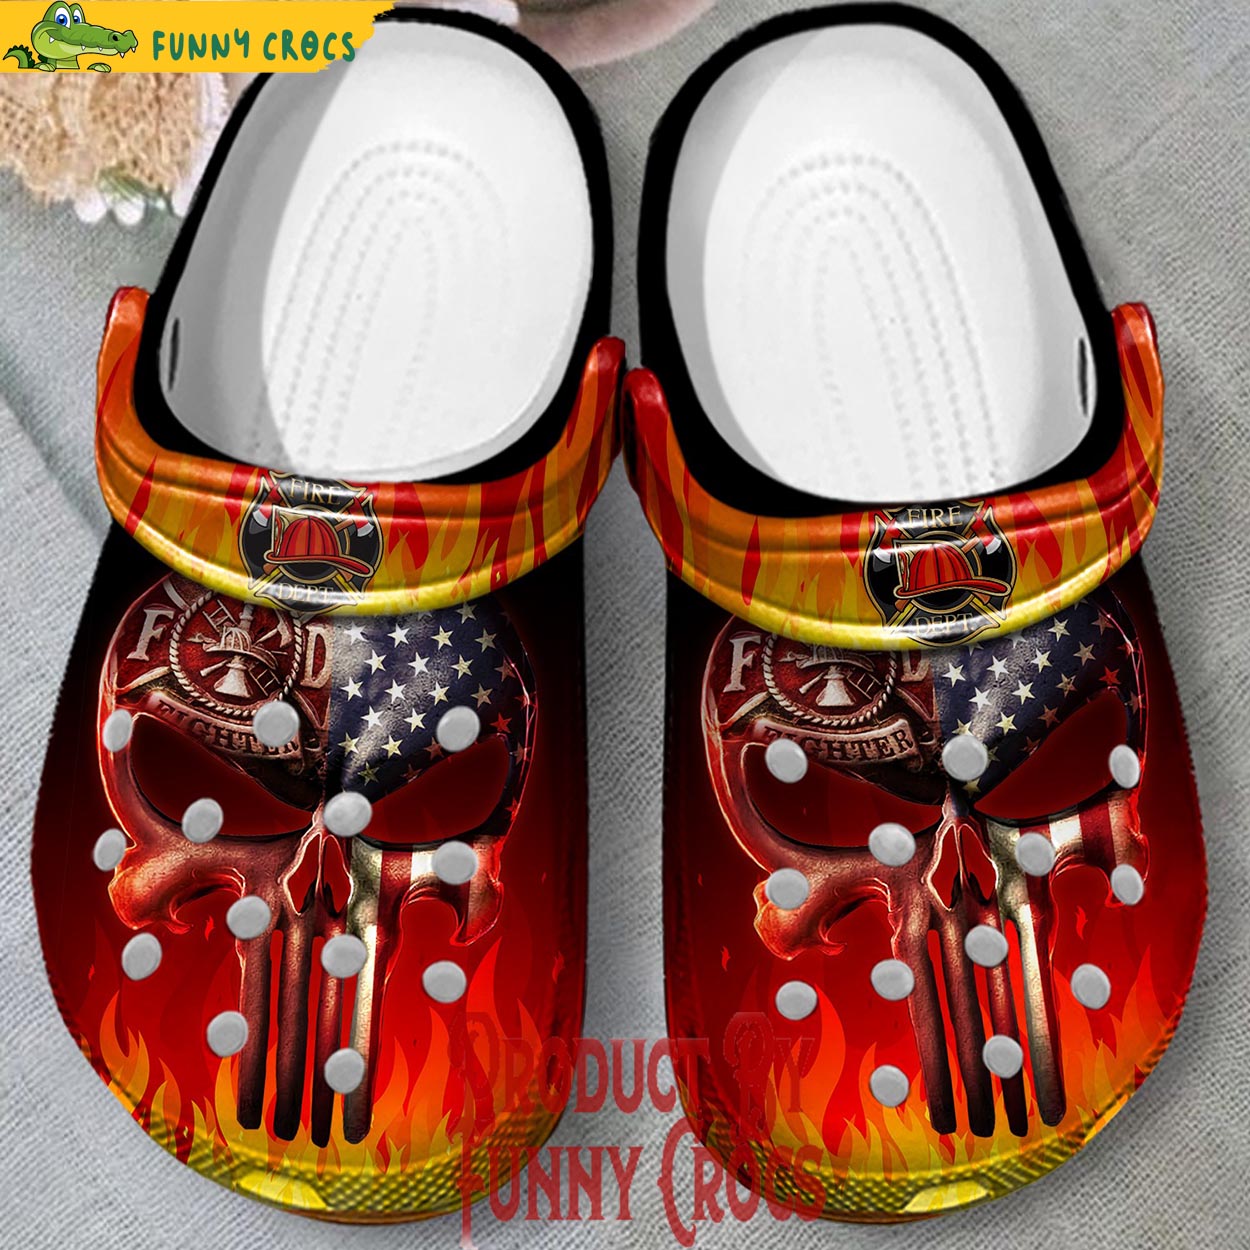 Firefighter Skull Crocs Shoes, Firefighter Gifts - Discover Comfort And ...